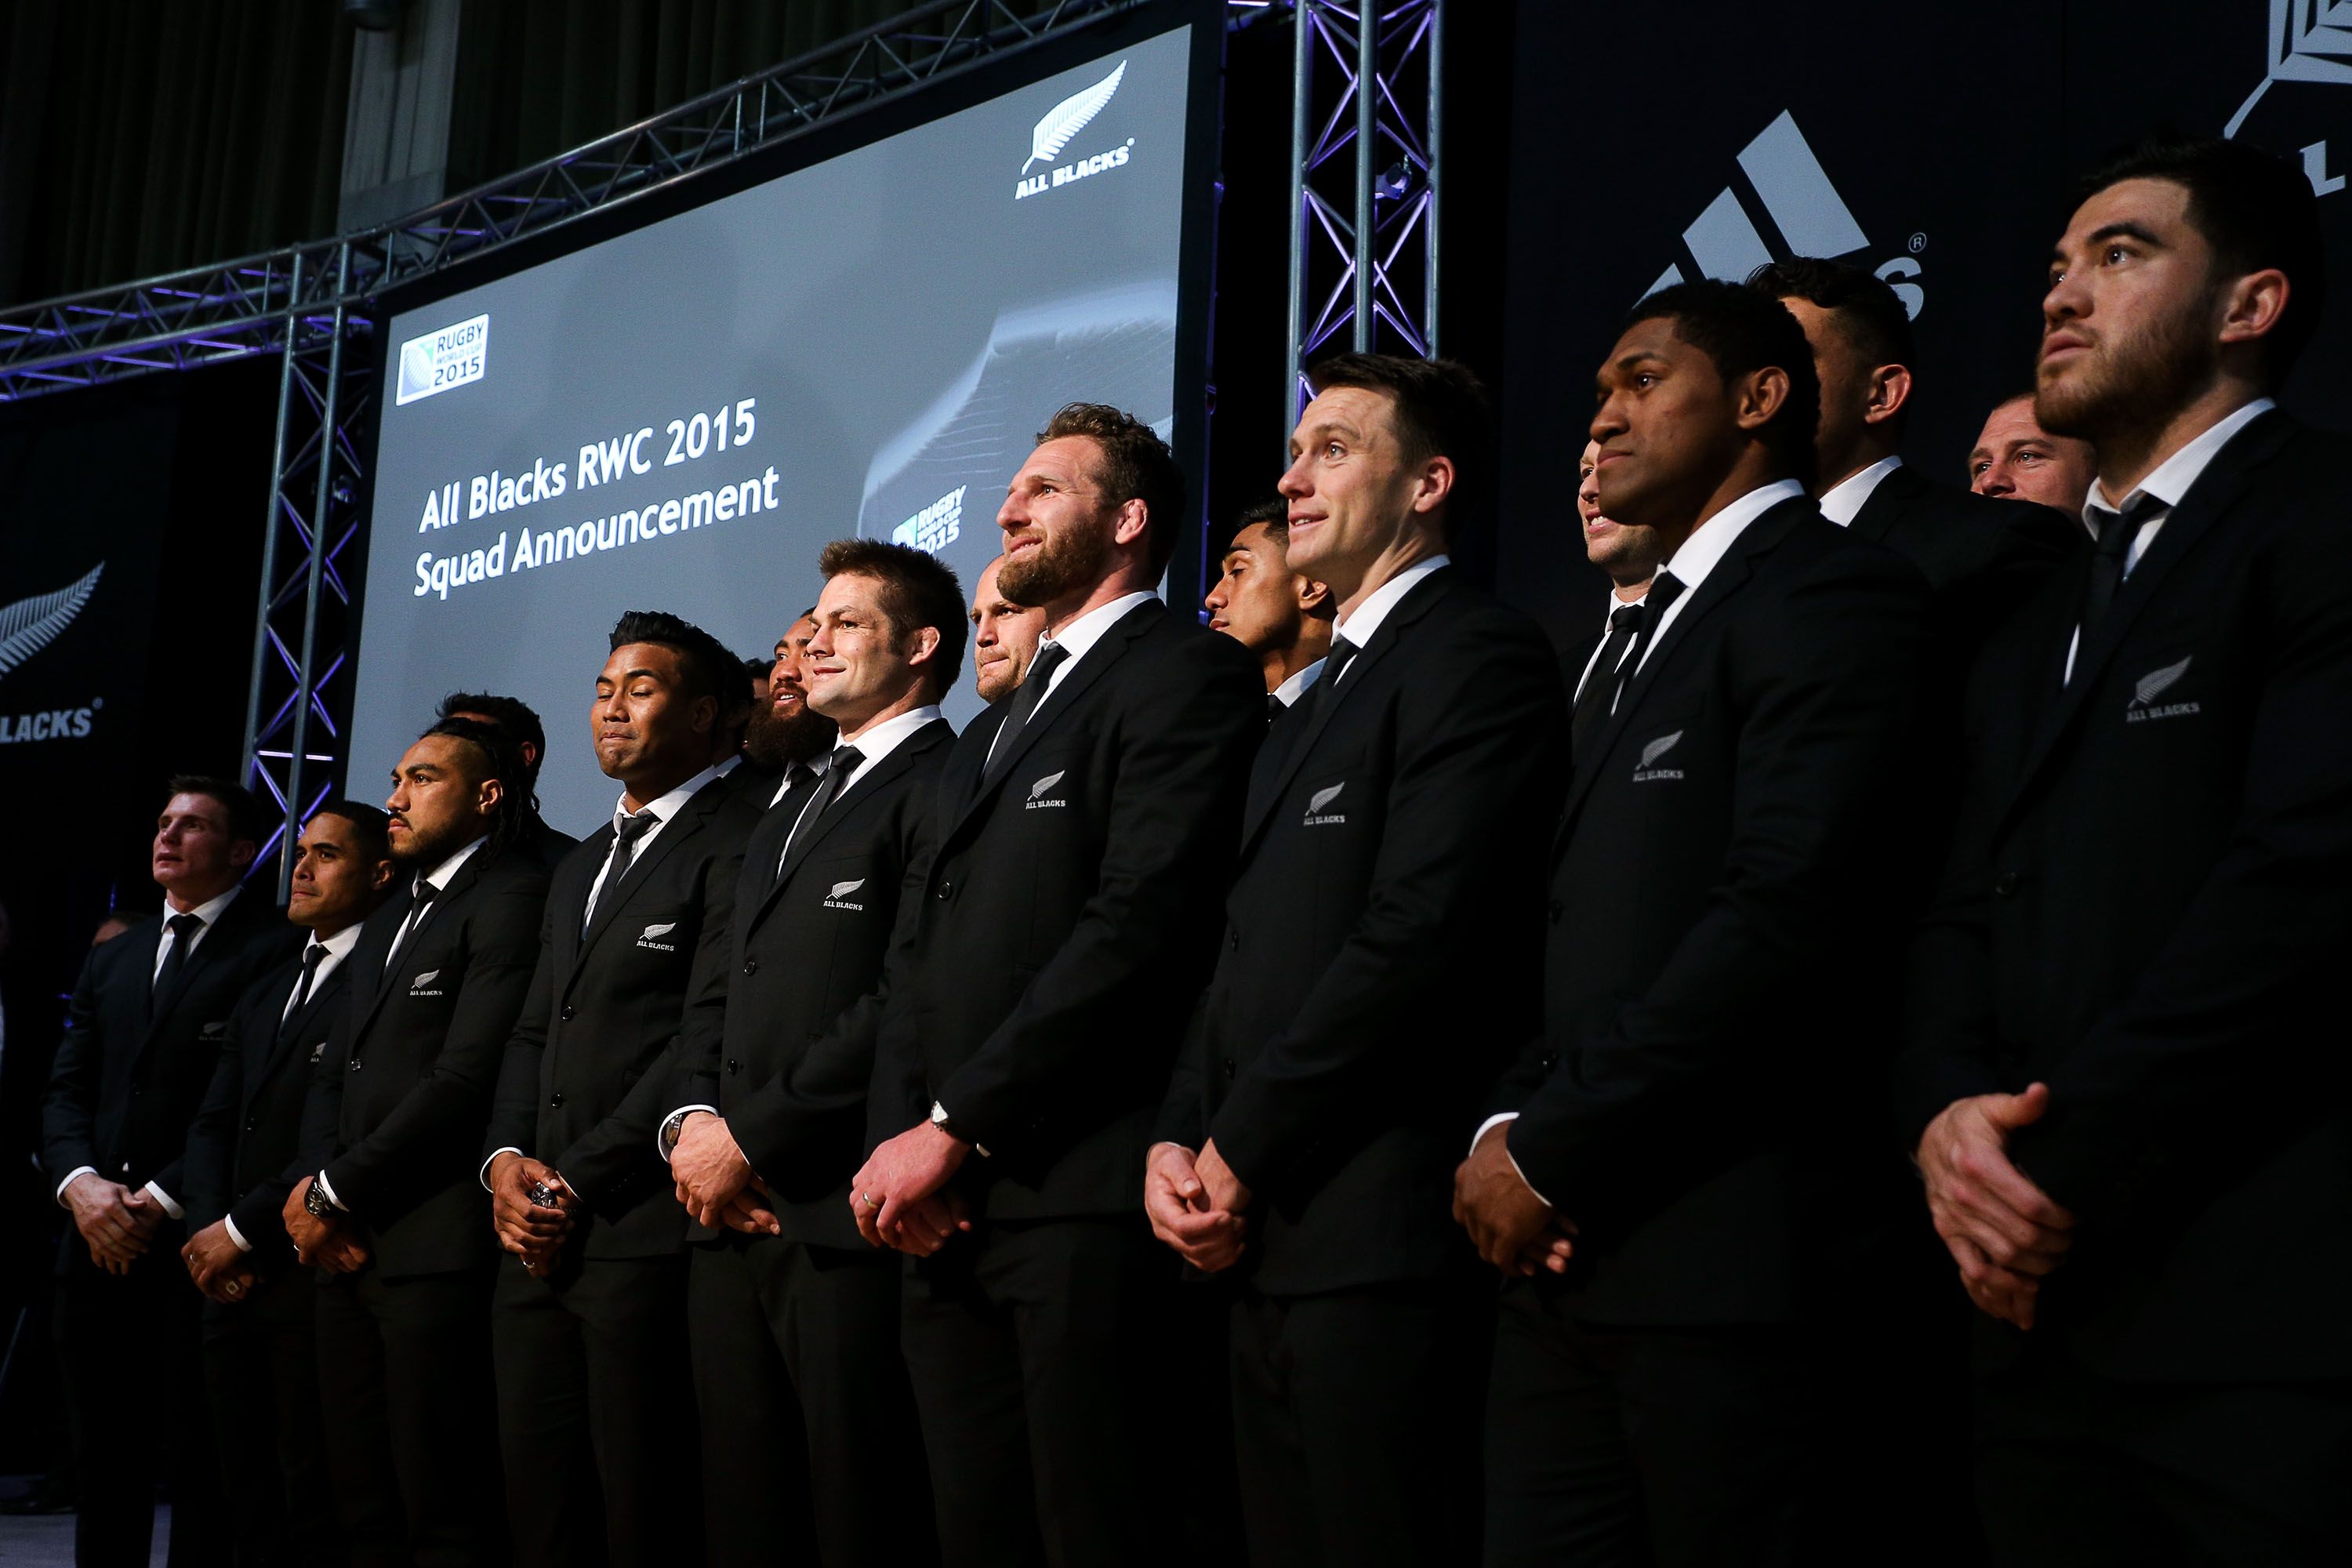 WELLINGTON, NEW ZEALAND - AUGUST 30:  Players look on during the New Zealand All Blacks Rugby World Cup team announcement at Parliament House on August 30, 2015 in Wellington, New Zealand.  (Photo by Hagen Hopkins/Getty Images)